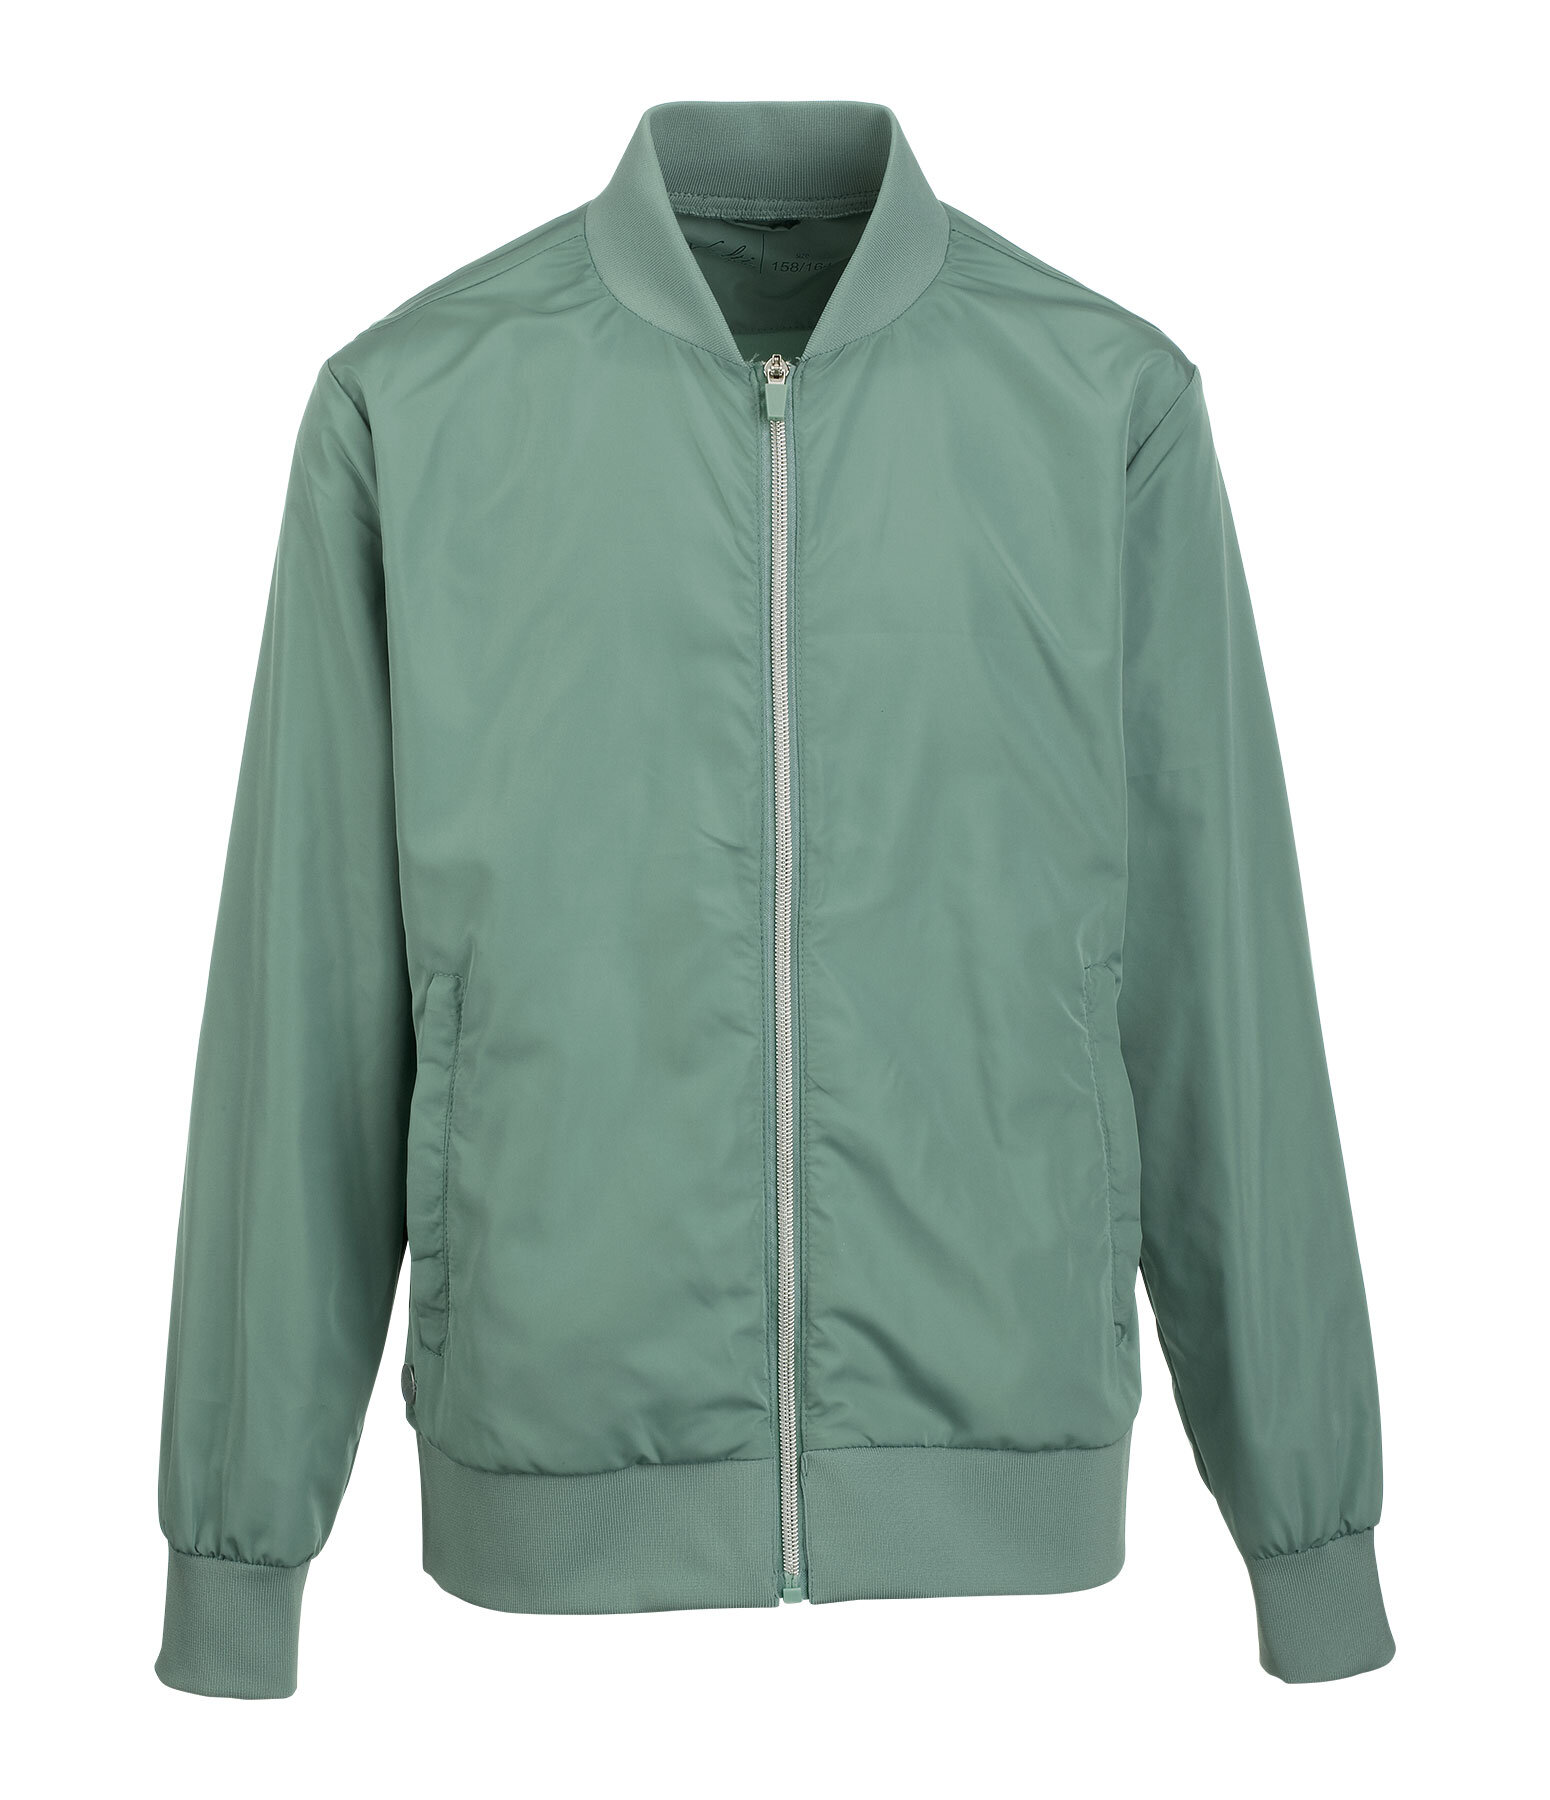 Training Jacket Fiona for Children and Teens